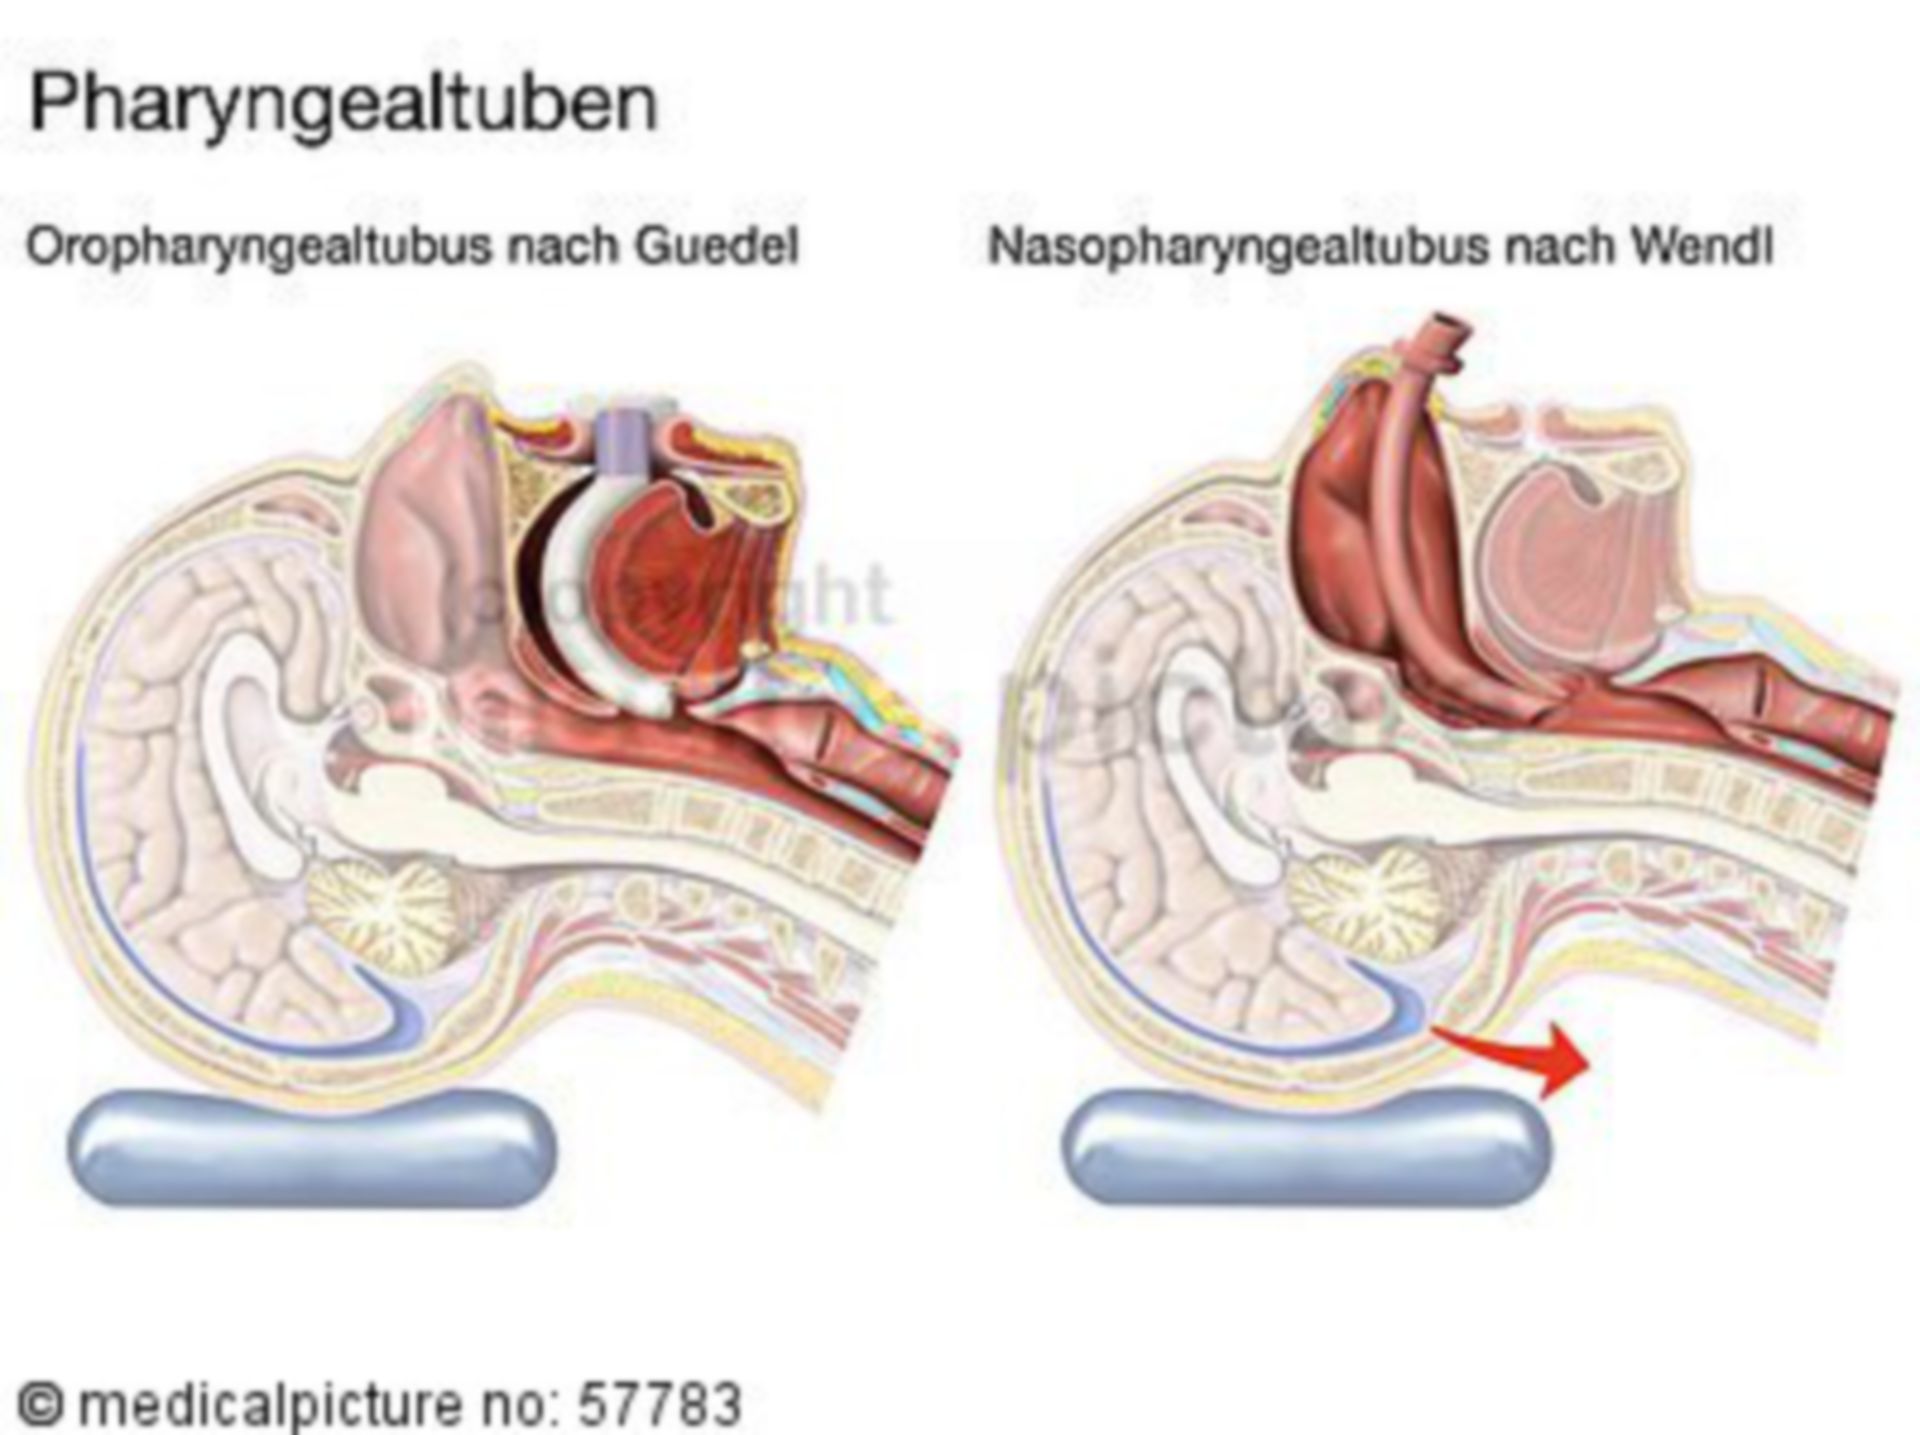 Comparison of Guedel and Wendle tube